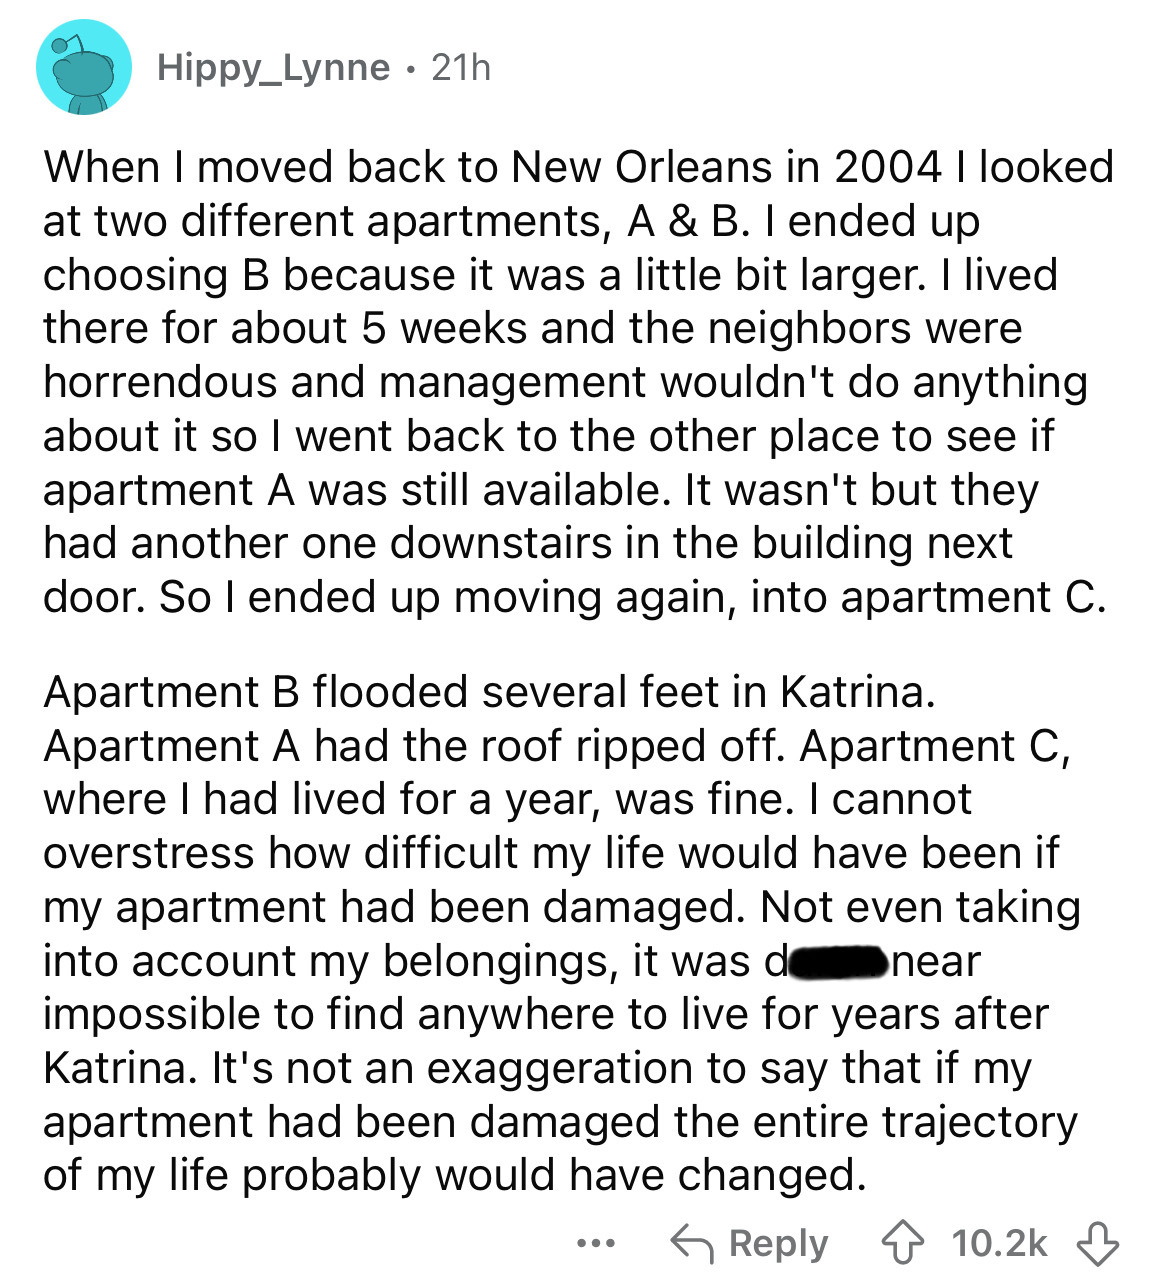 number - Hippy_Lynne 21h . When I moved back to New Orleans in 2004 I looked at two different apartments, A & B. I ended up choosing B because it was a little bit larger. I lived there for about 5 weeks and the neighbors were horrendous and management wou